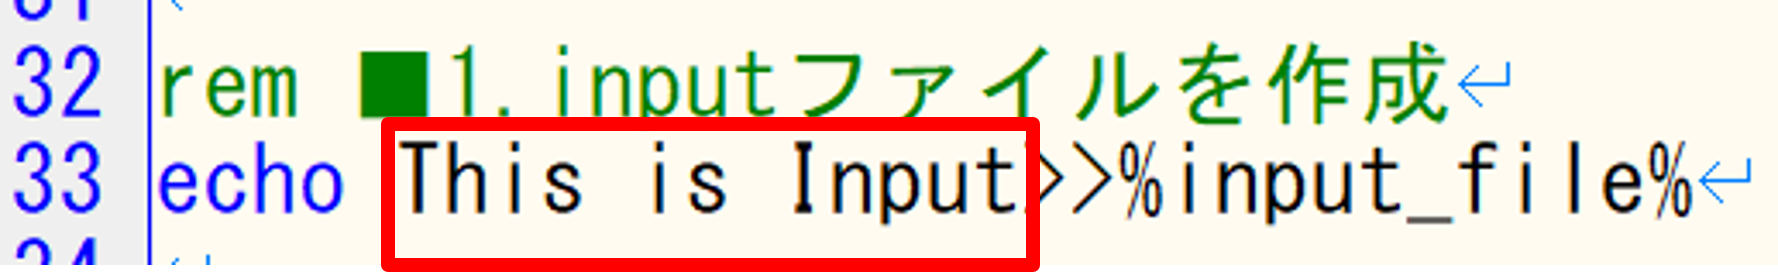 inputファイル.png